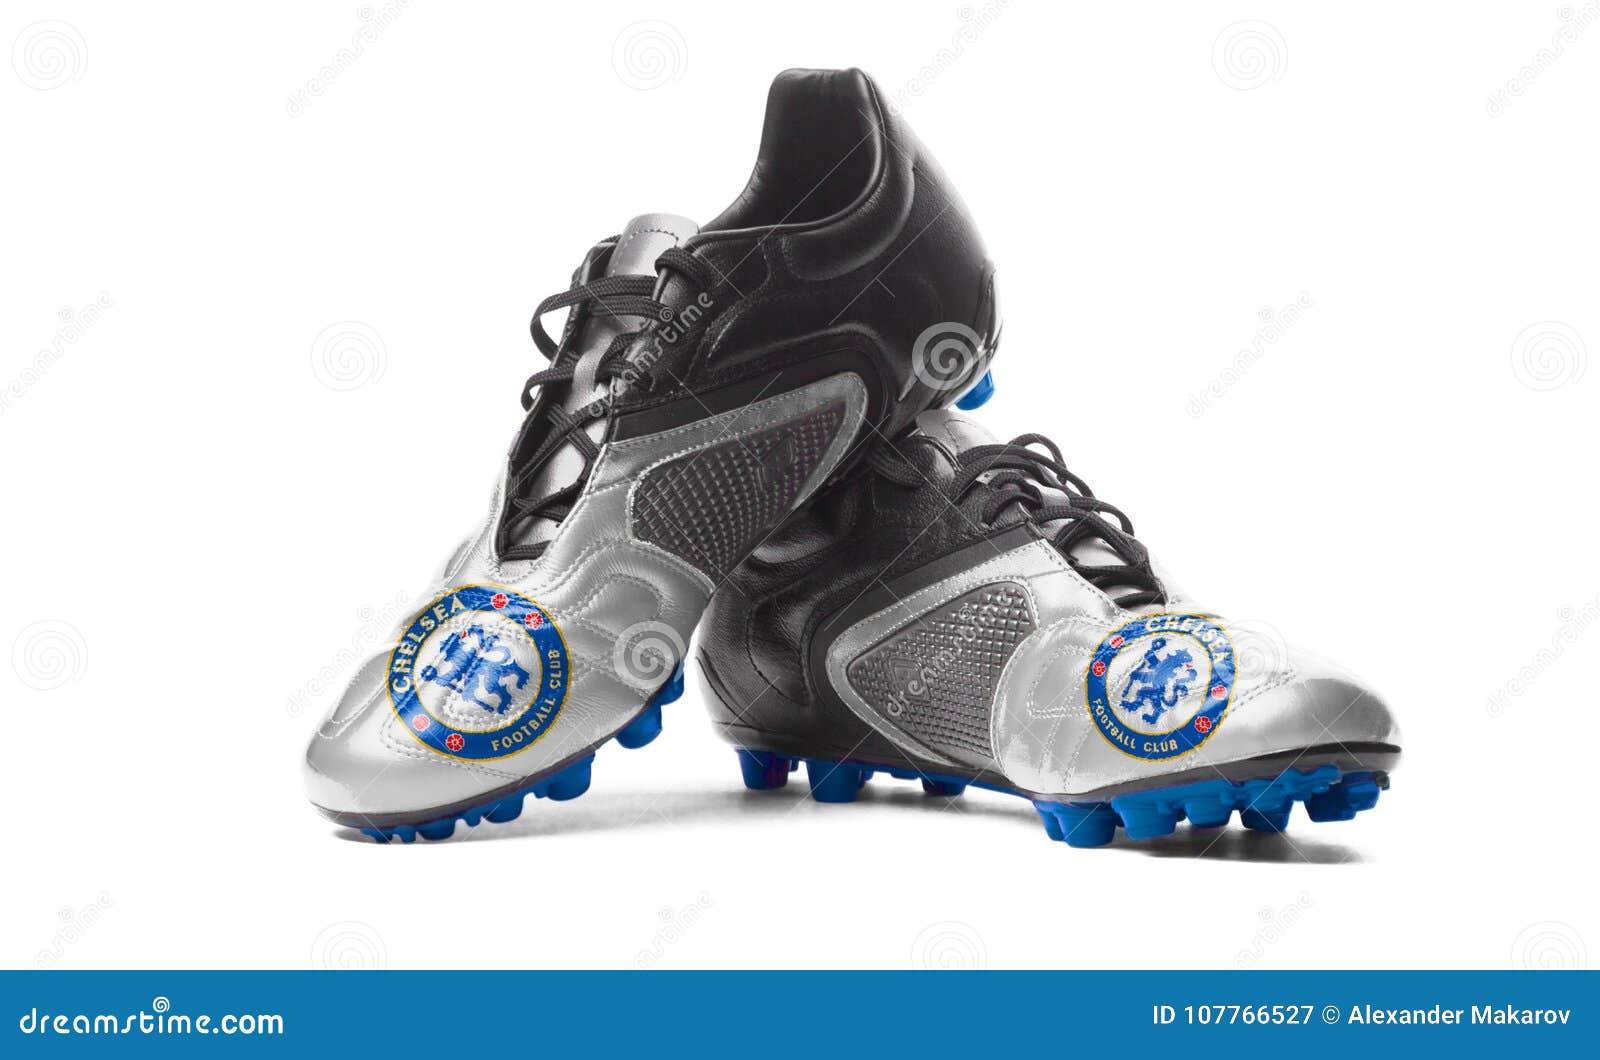 5+ Thousand Chelsea Football Club Royalty-Free Images, Stock Photos &  Pictures